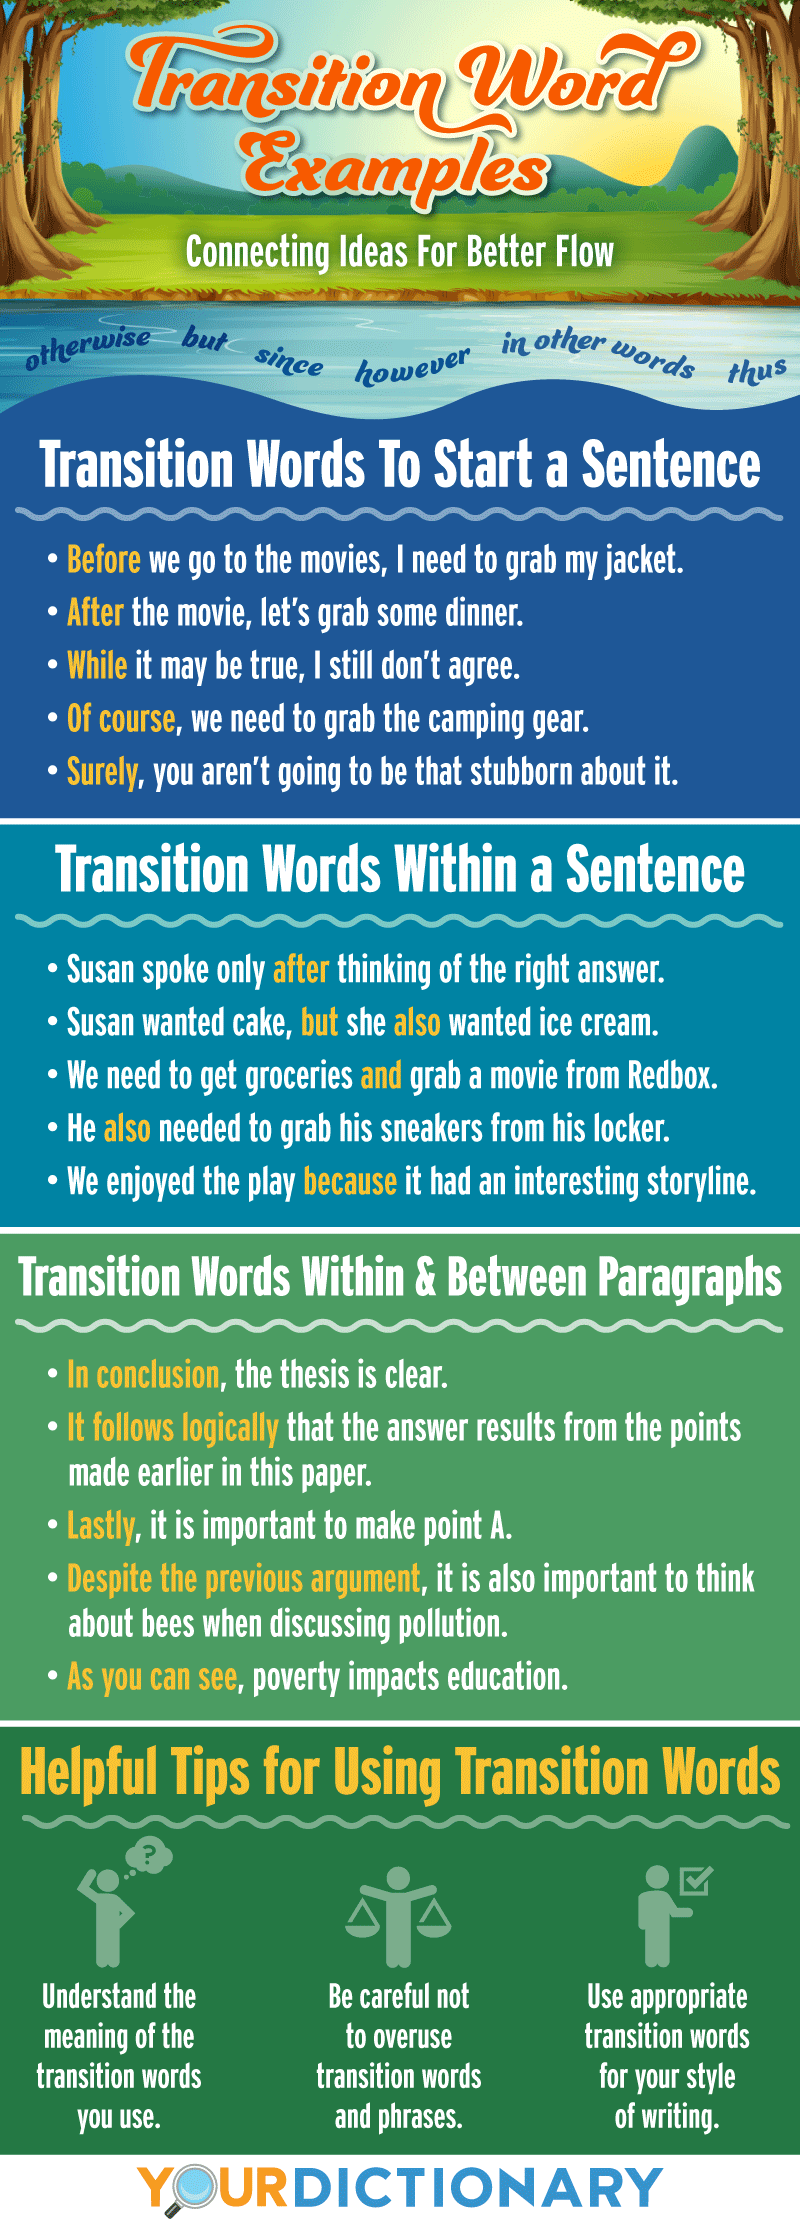 Transition Words: Examples In Sentences, Paragraphs & Essays